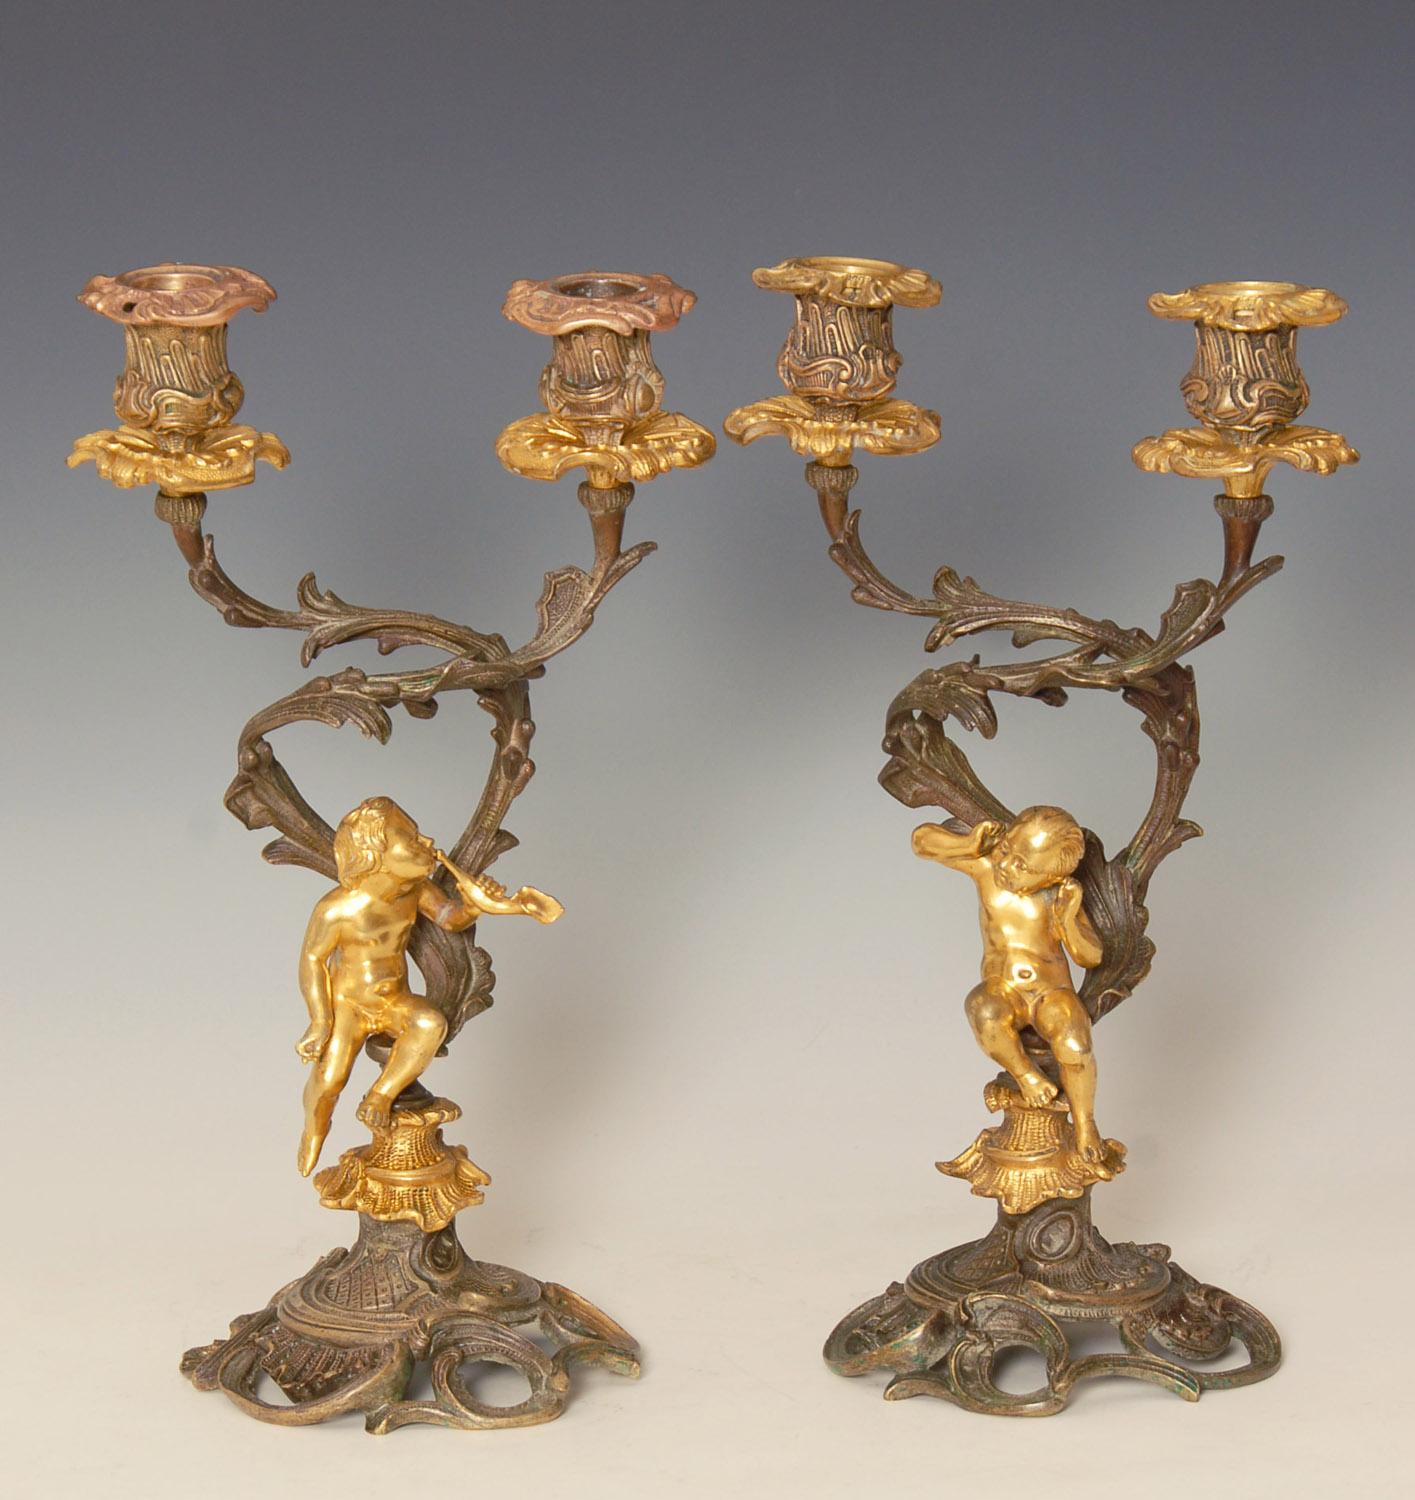 Absolutely charming pair of late 19th century Putti / Cherub candelabra, probably French.
gilt figures on patinated bronze.
The male figure is blowing a horn type instrument while the other is cocking her ears to listen.

Heavy solid pieces